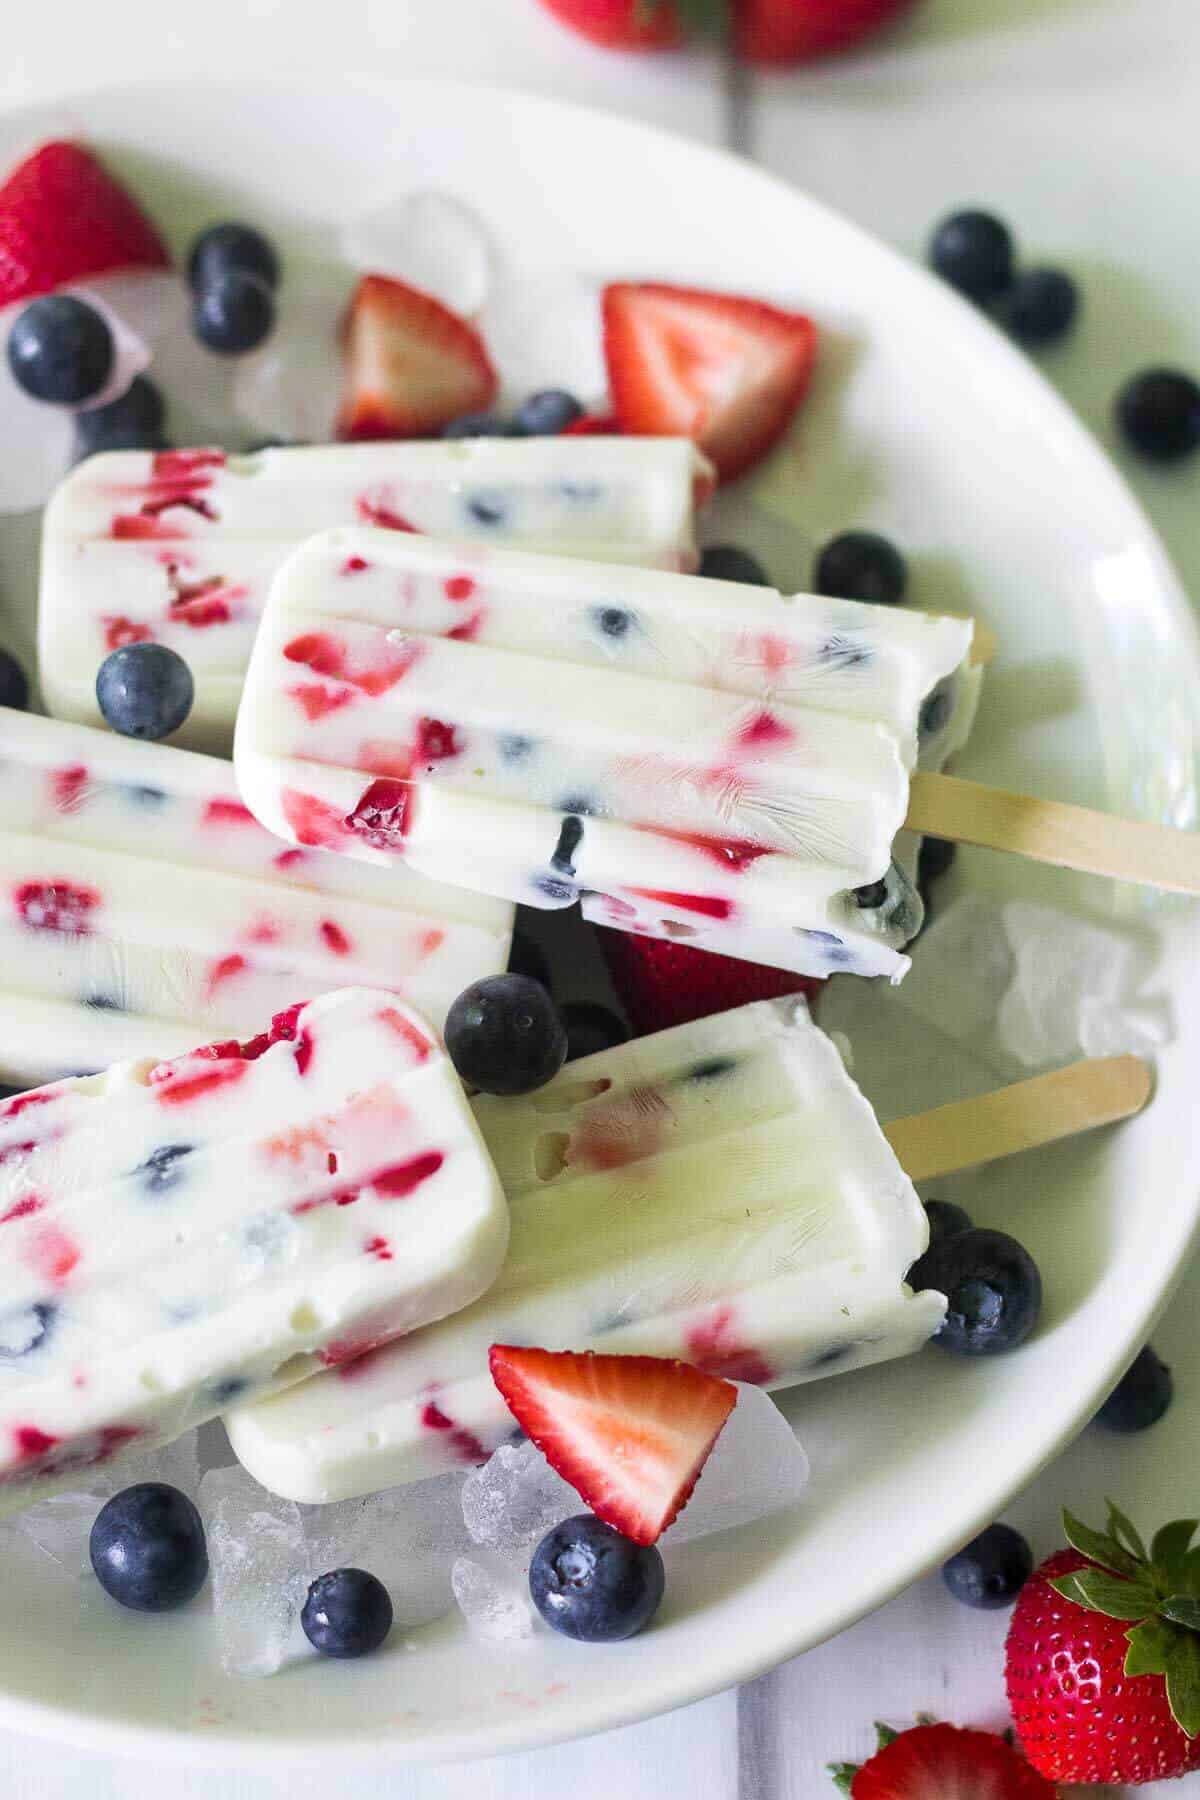 Red, white, and blue yogurt popsicles